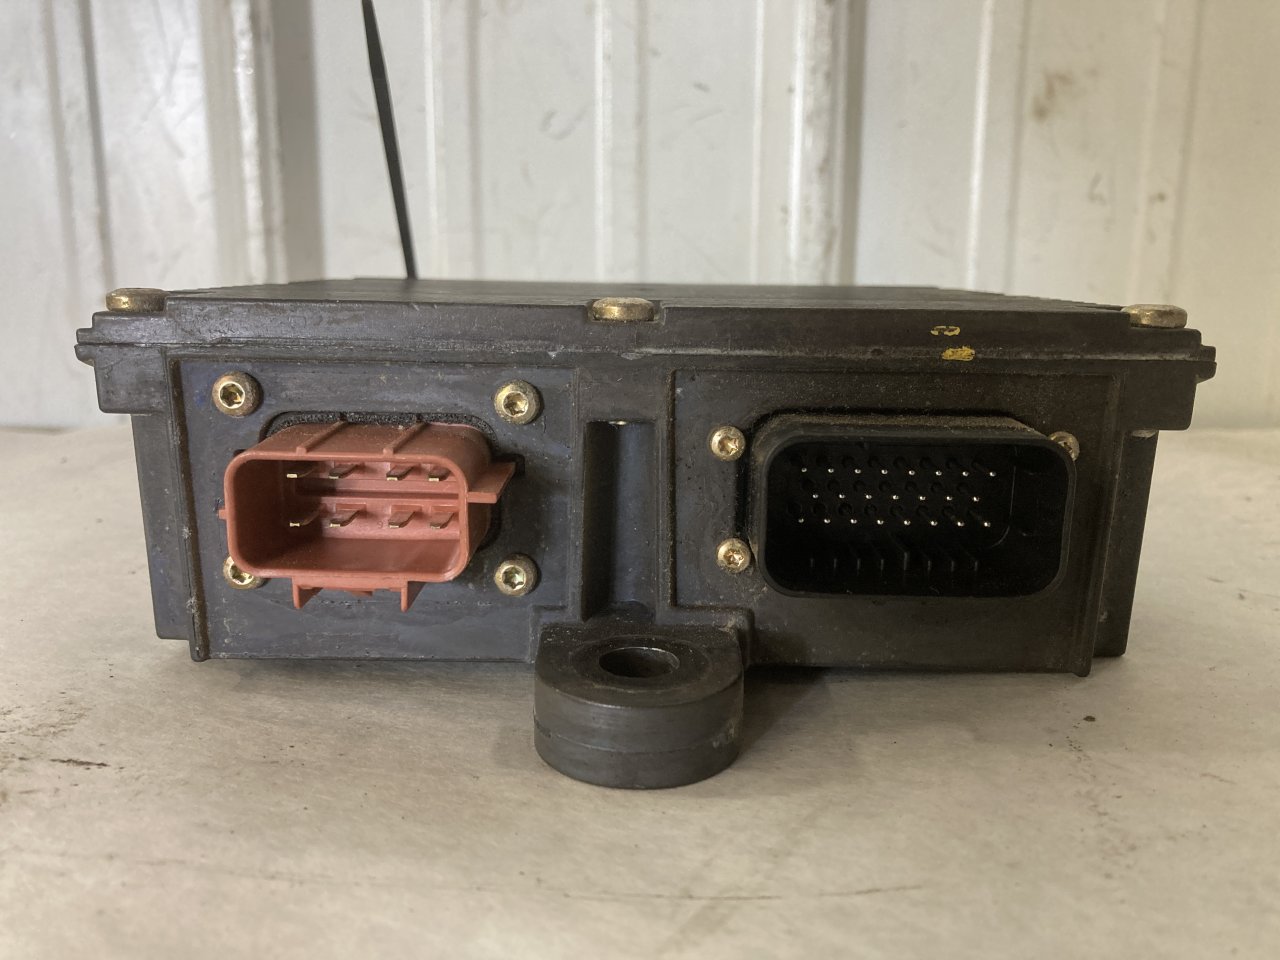 PSA on diesel heater - AMRLV is amazing : r/ScoutCampers